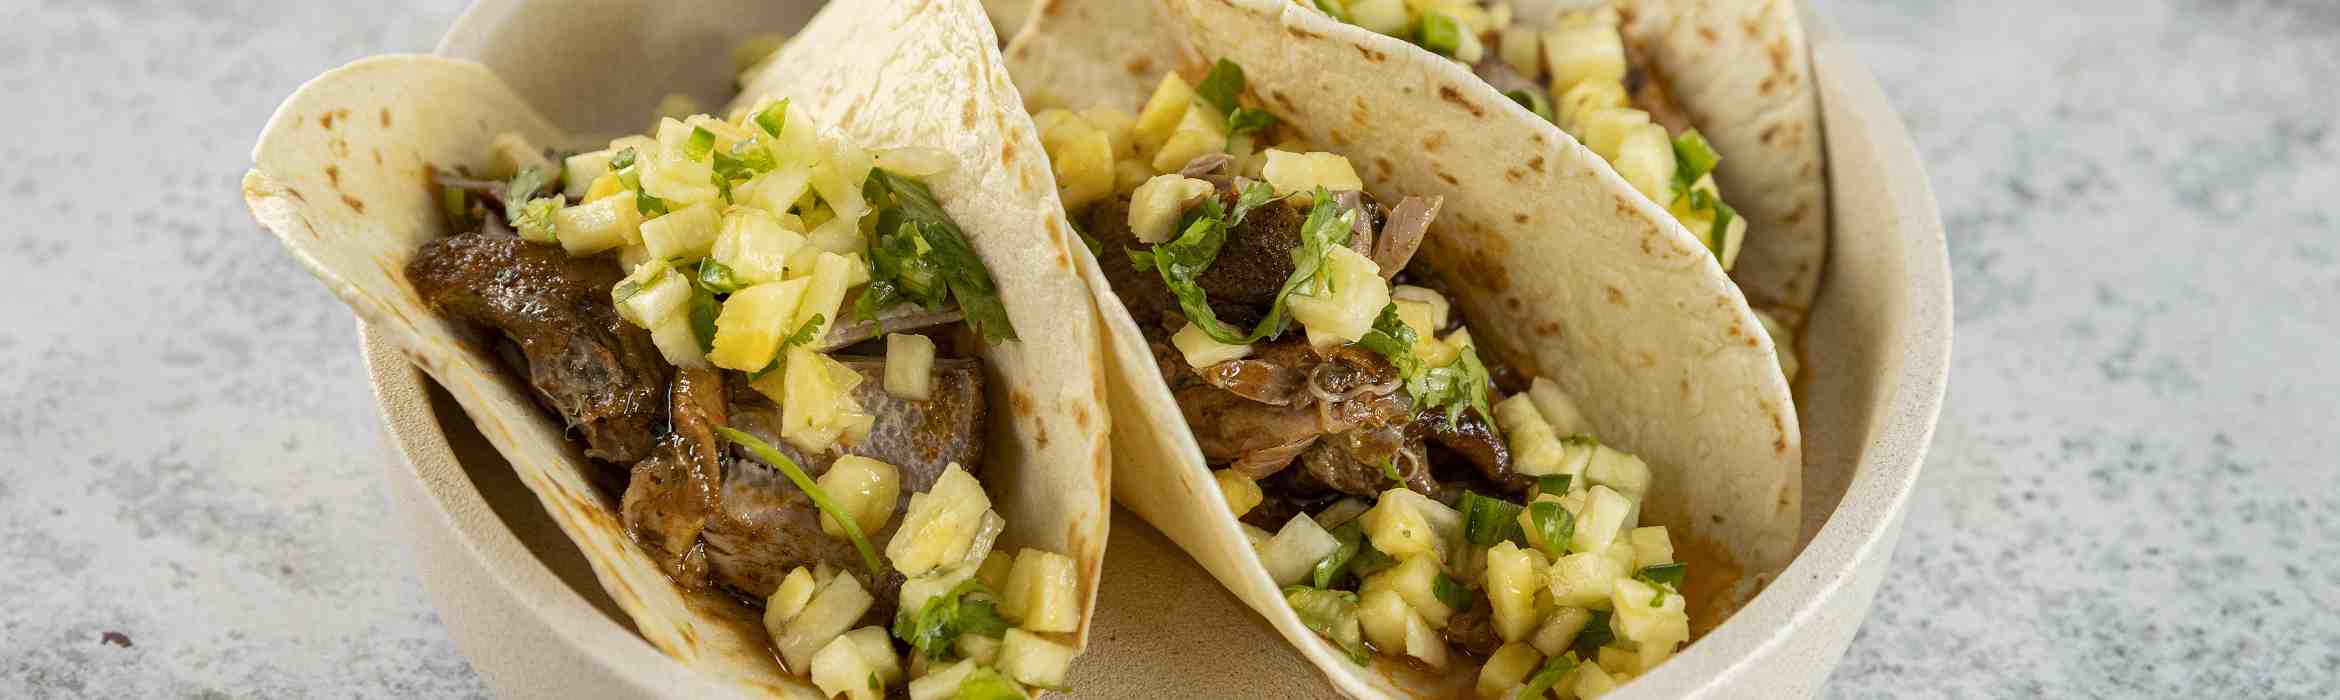 Slow Cooked Duck and Pineapple Carnitas Recipe